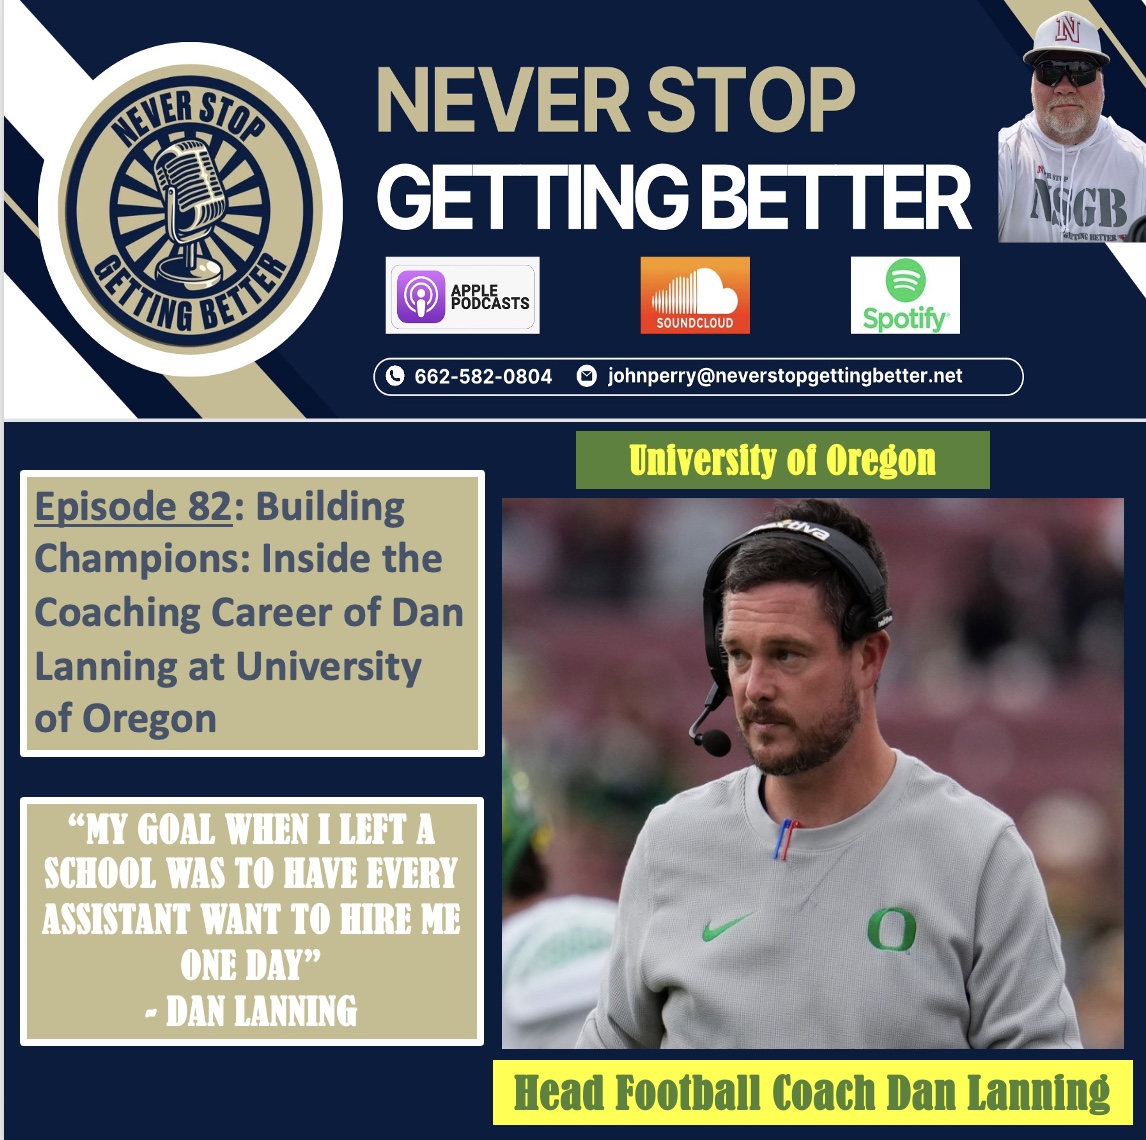 Are you willing to sacrifice what you want now for what you want most? @CoachDanLanning was! Take a listen to this story... from playing football at @williamjewell 17 years ago, to now the head football coach at @oregonfootball #AmazingStory #GoodDude #GoDucks 🦆 @GoDucks